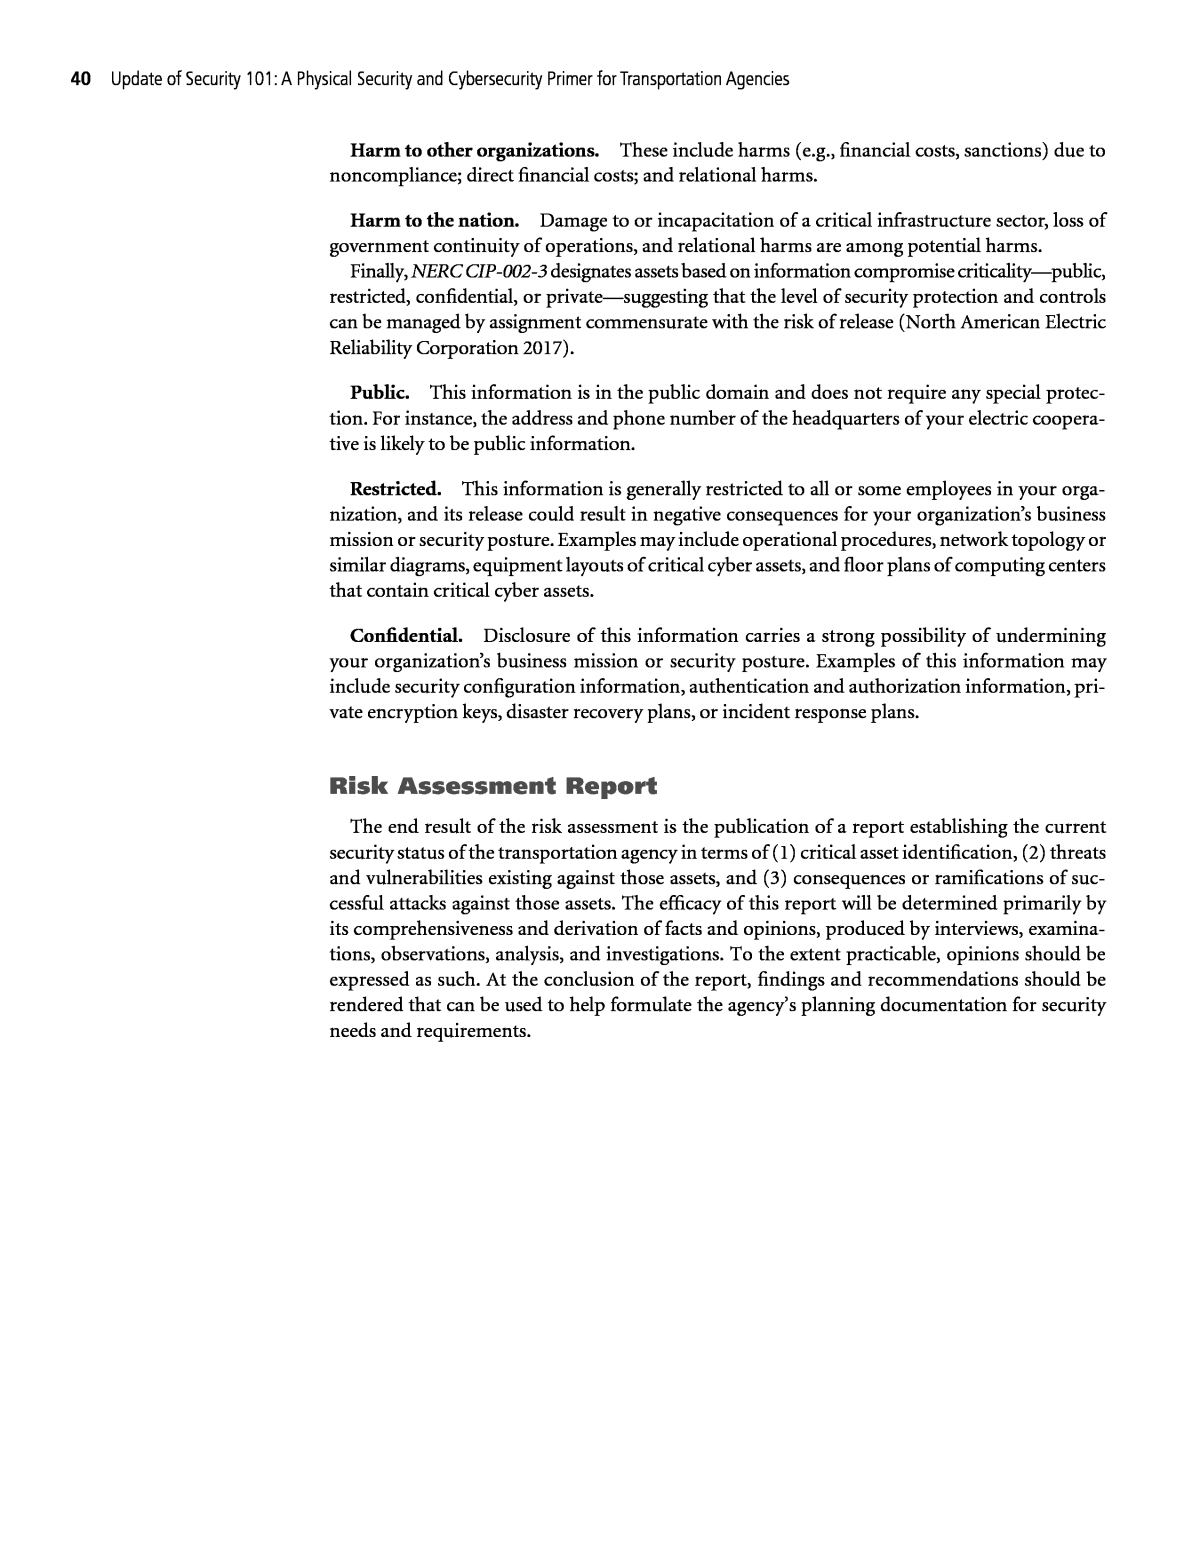 Chapter 20 - Physical Security and Cybersecurity Risk Management Inside Physical Security Risk Assessment Report Template